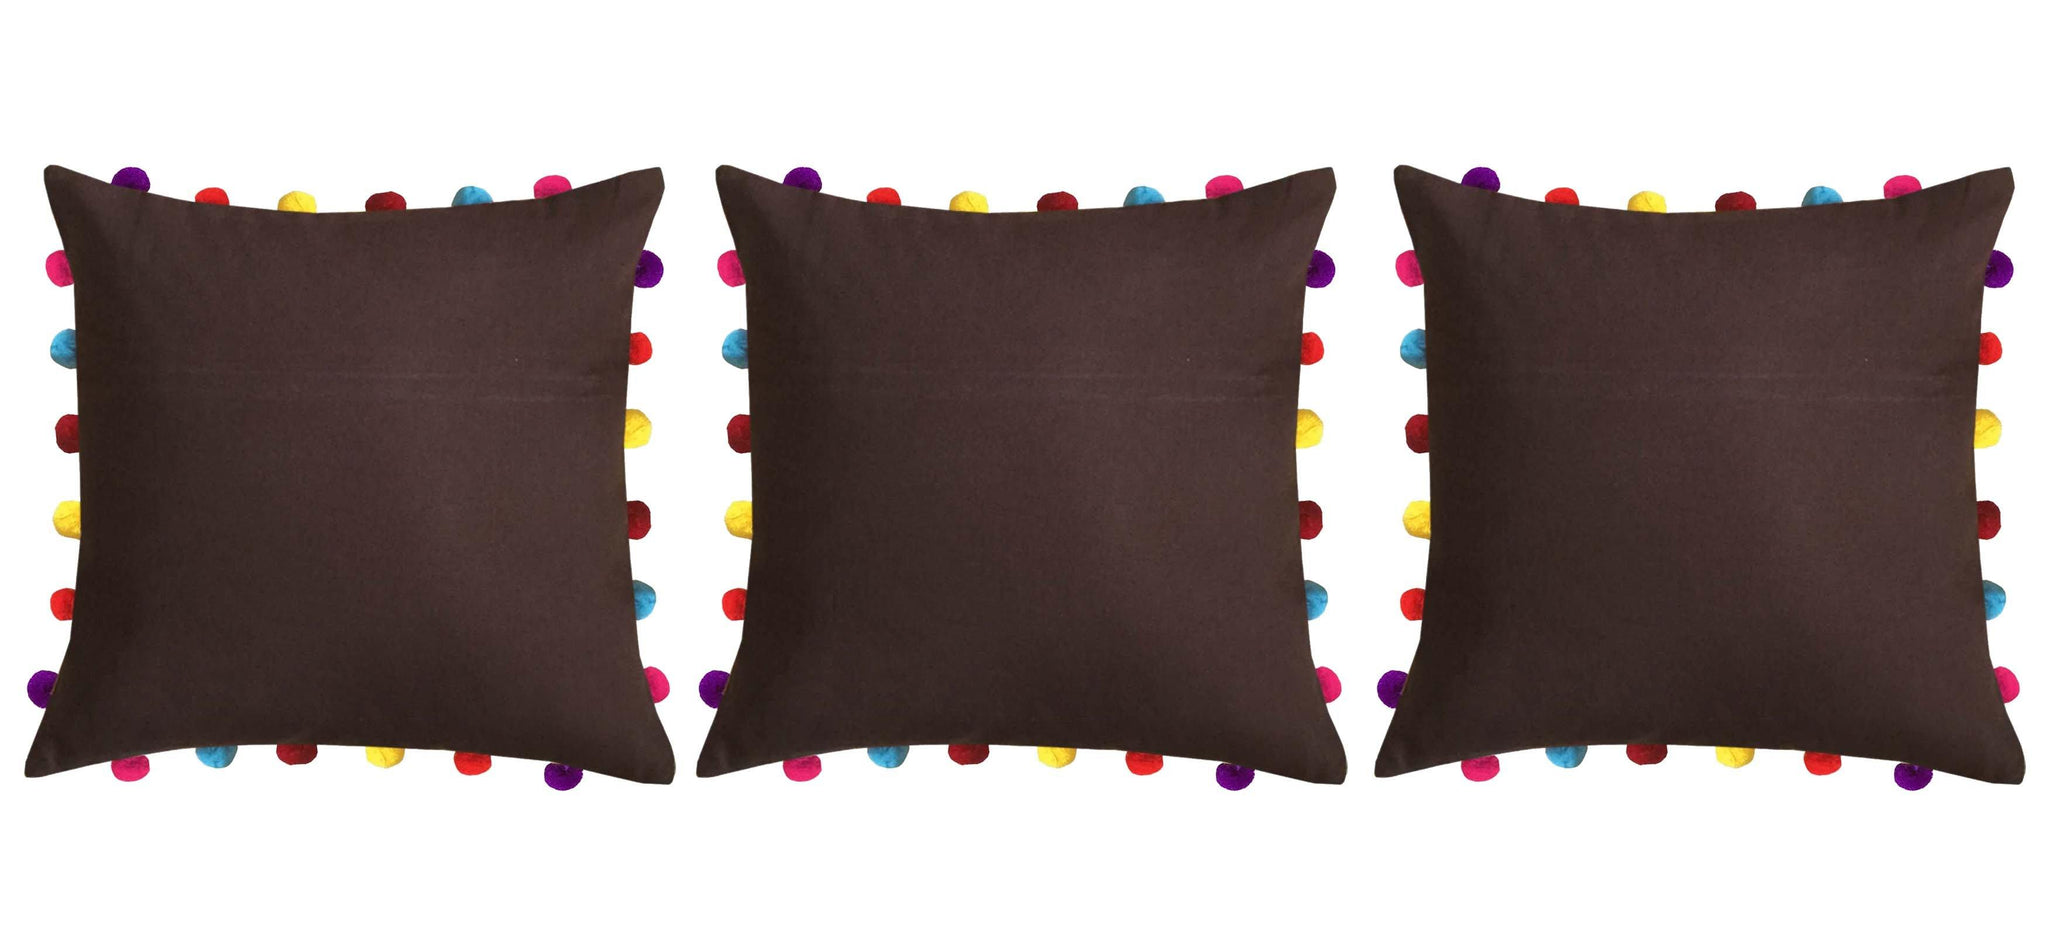 Lushomes French Roast Cushion Cover with Colorful Pom pom (3 pcs, 18 x 18”) - Lushomes